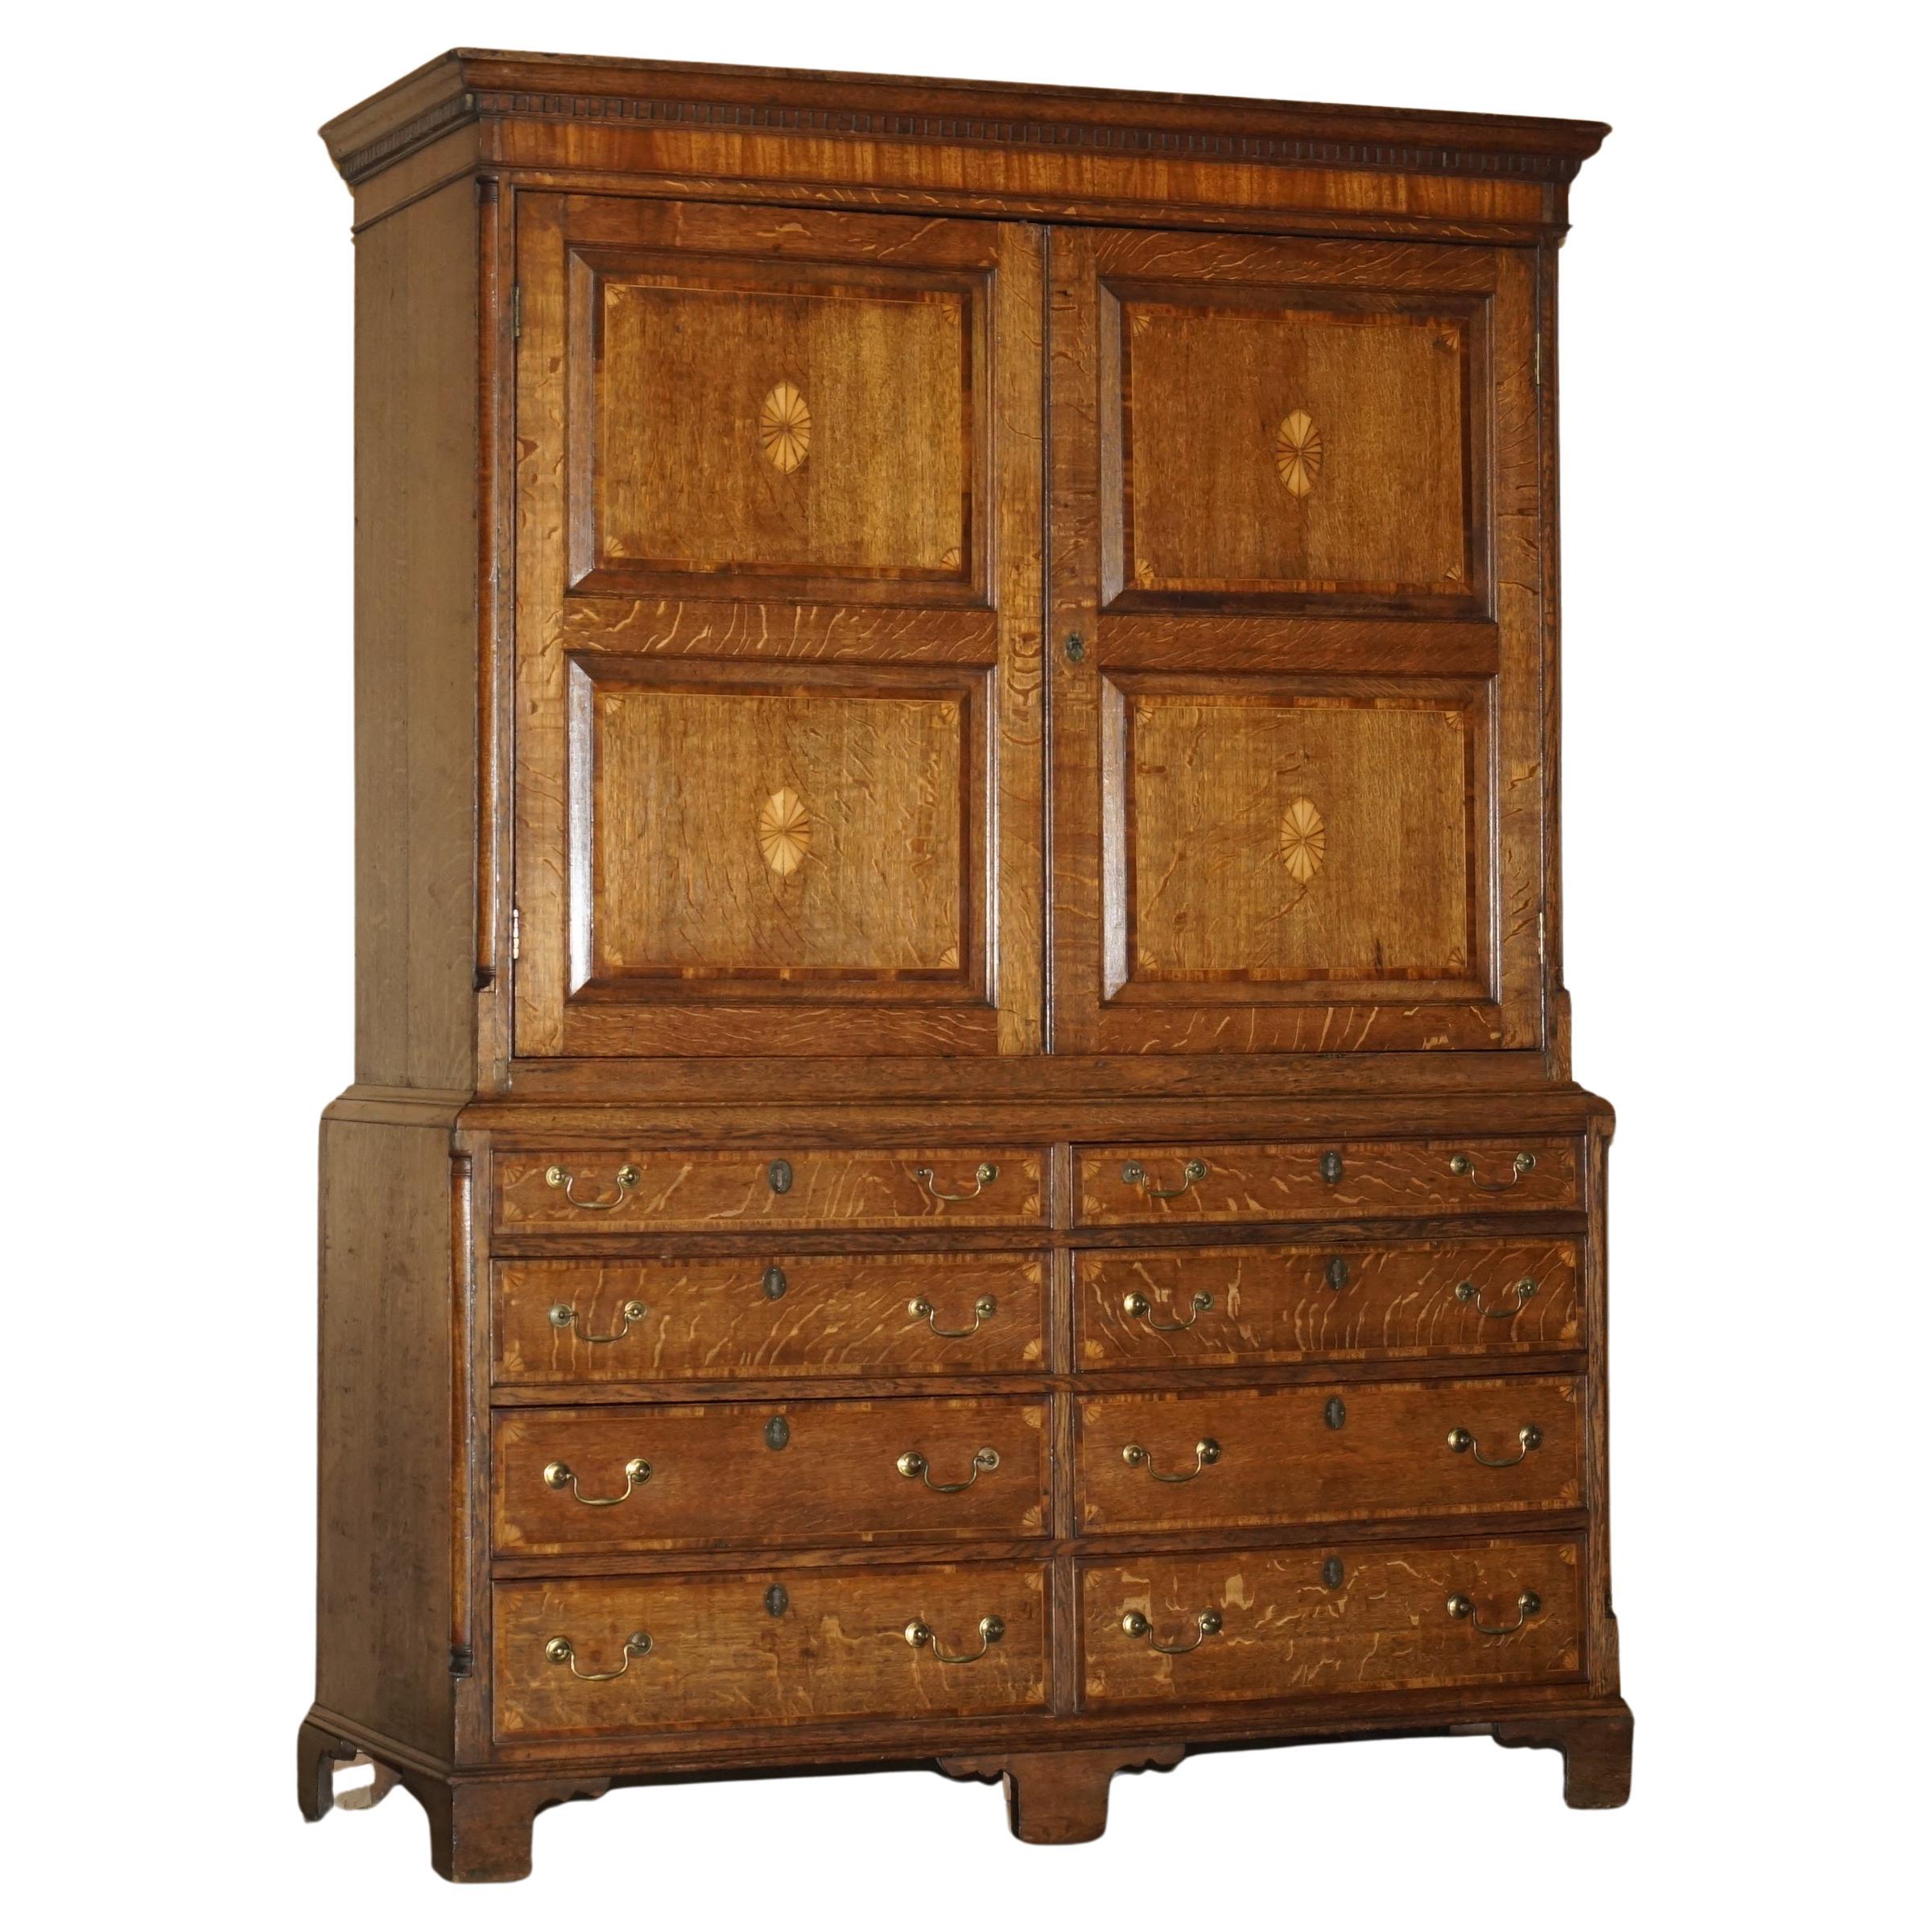 EXQUISITE ANTiQUE 1800 SHERATON INLAID HOUSEKEEPERS CUPBOARD WARDROBE DRAWERS For Sale